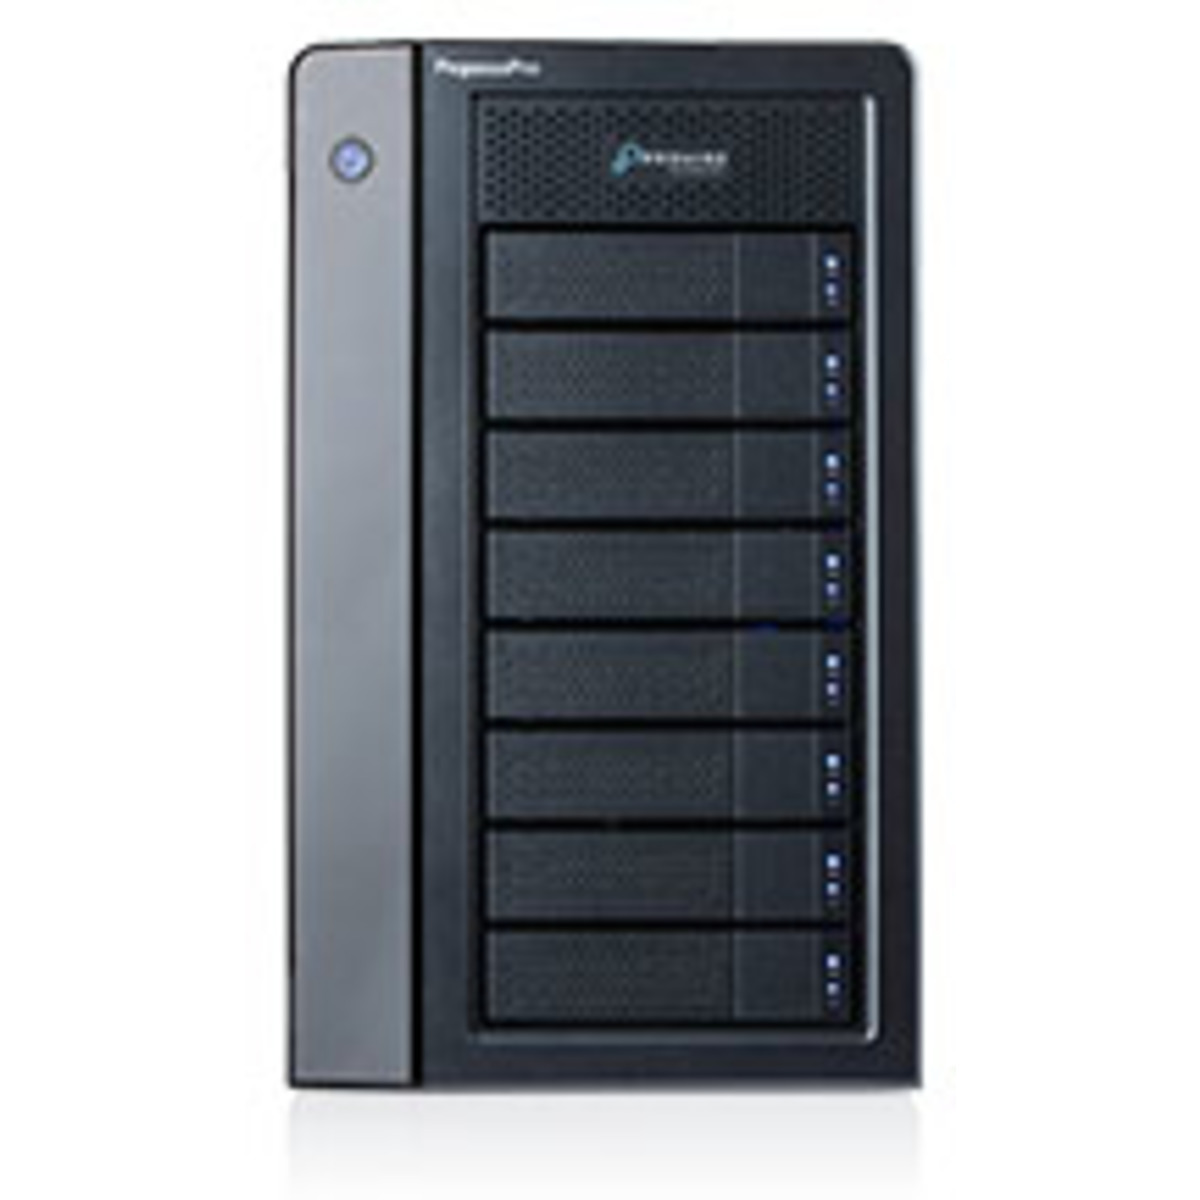 buy Promise Technology PegasusPro R8 192tb Desktop DAS-NAS - Combo Direct + Network Storage Device 8x24000gb Western Digital Ultrastar HC580 WUH722424ALE6L4 3.5 7200rpm SATA 6Gb/s HDD ENTERPRISE Class Drives Installed - Burn-In Tested - nas headquarters buy network attached storage server device das new raid-5 free shipping usa spring sale PegasusPro R8